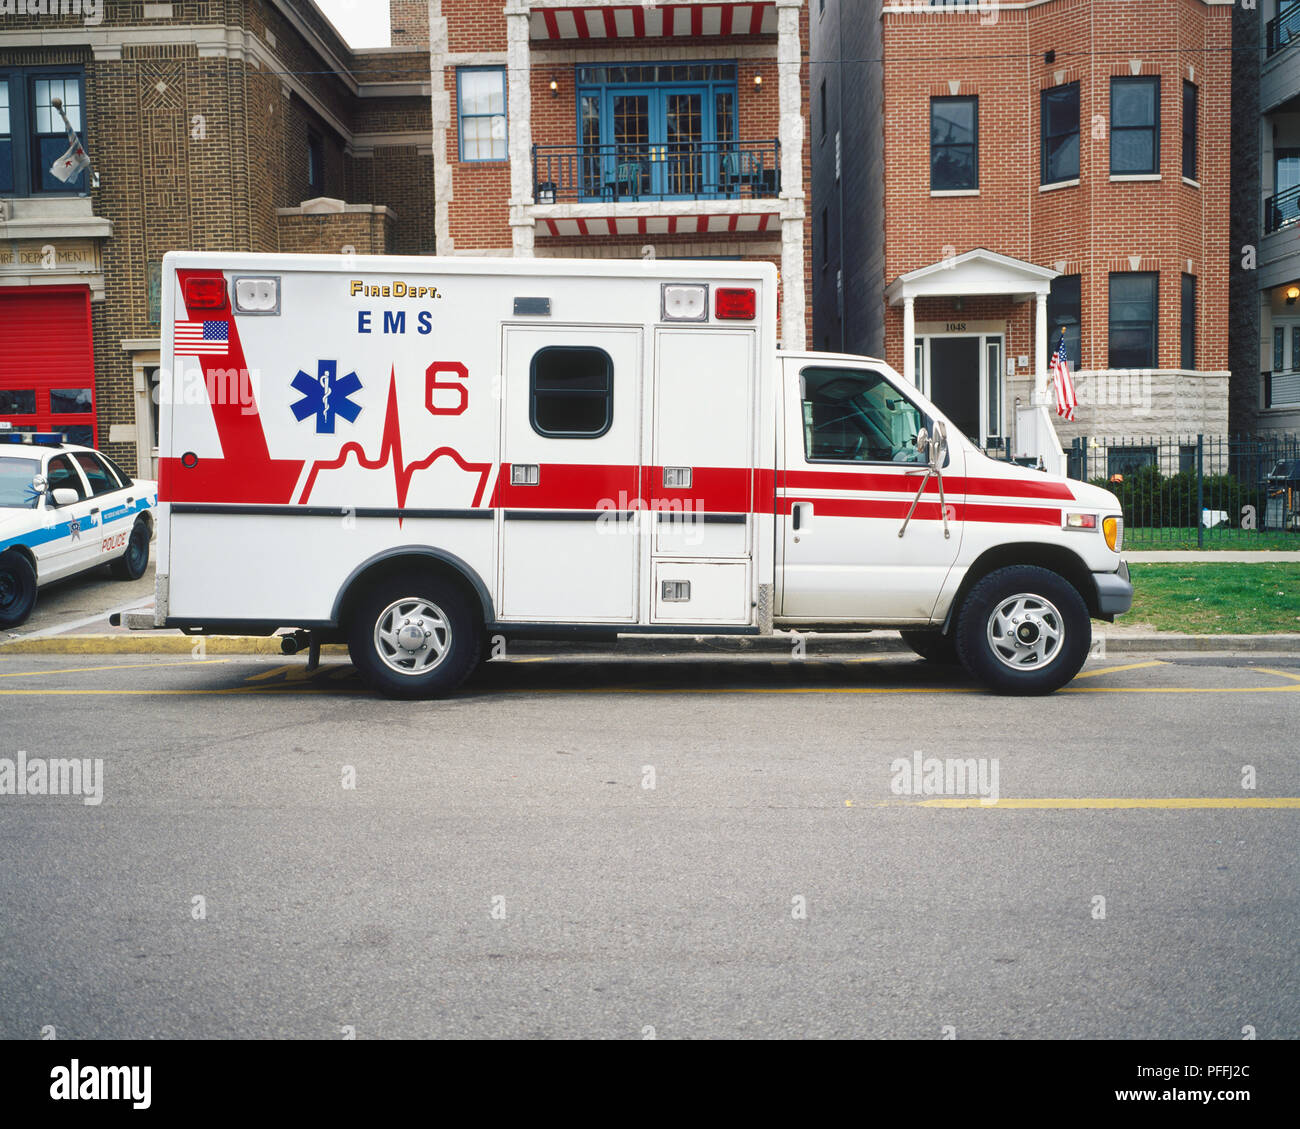 USA, Illinois, Chicago, emergency ambulance parked by curb, next to police car. Stock Photo